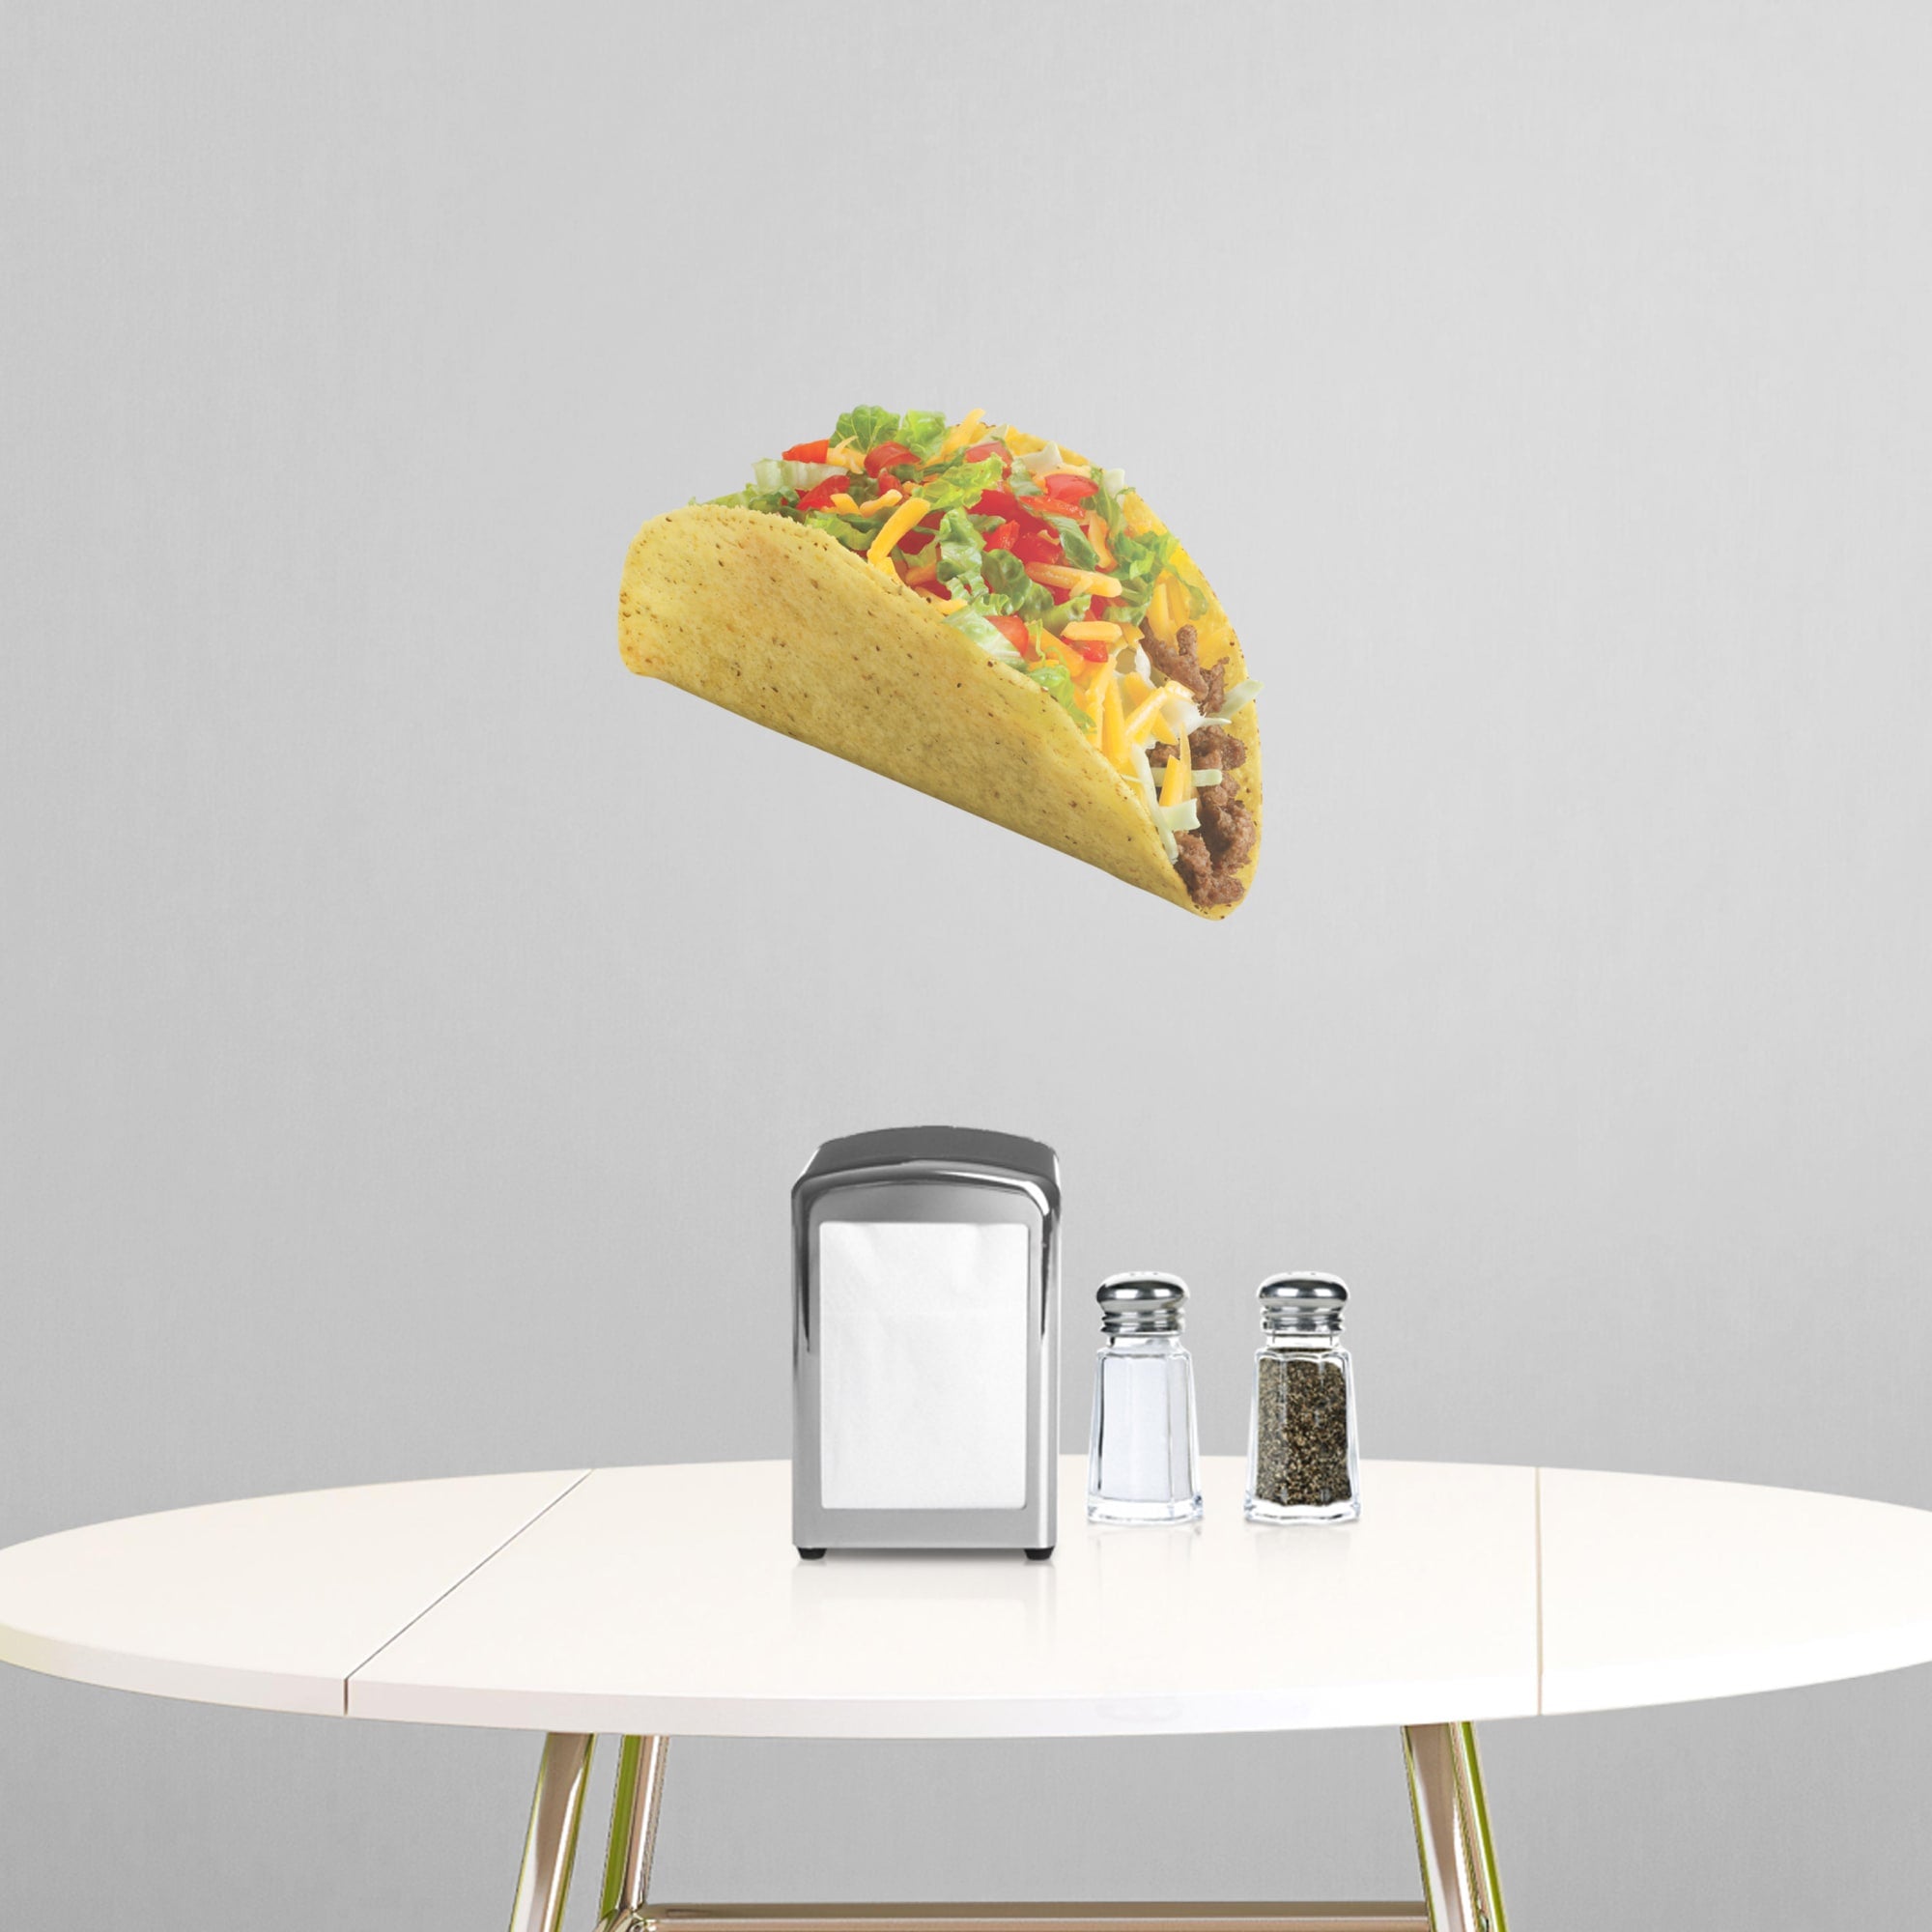 Taco - Removable Vinyl Decal Large by Fathead